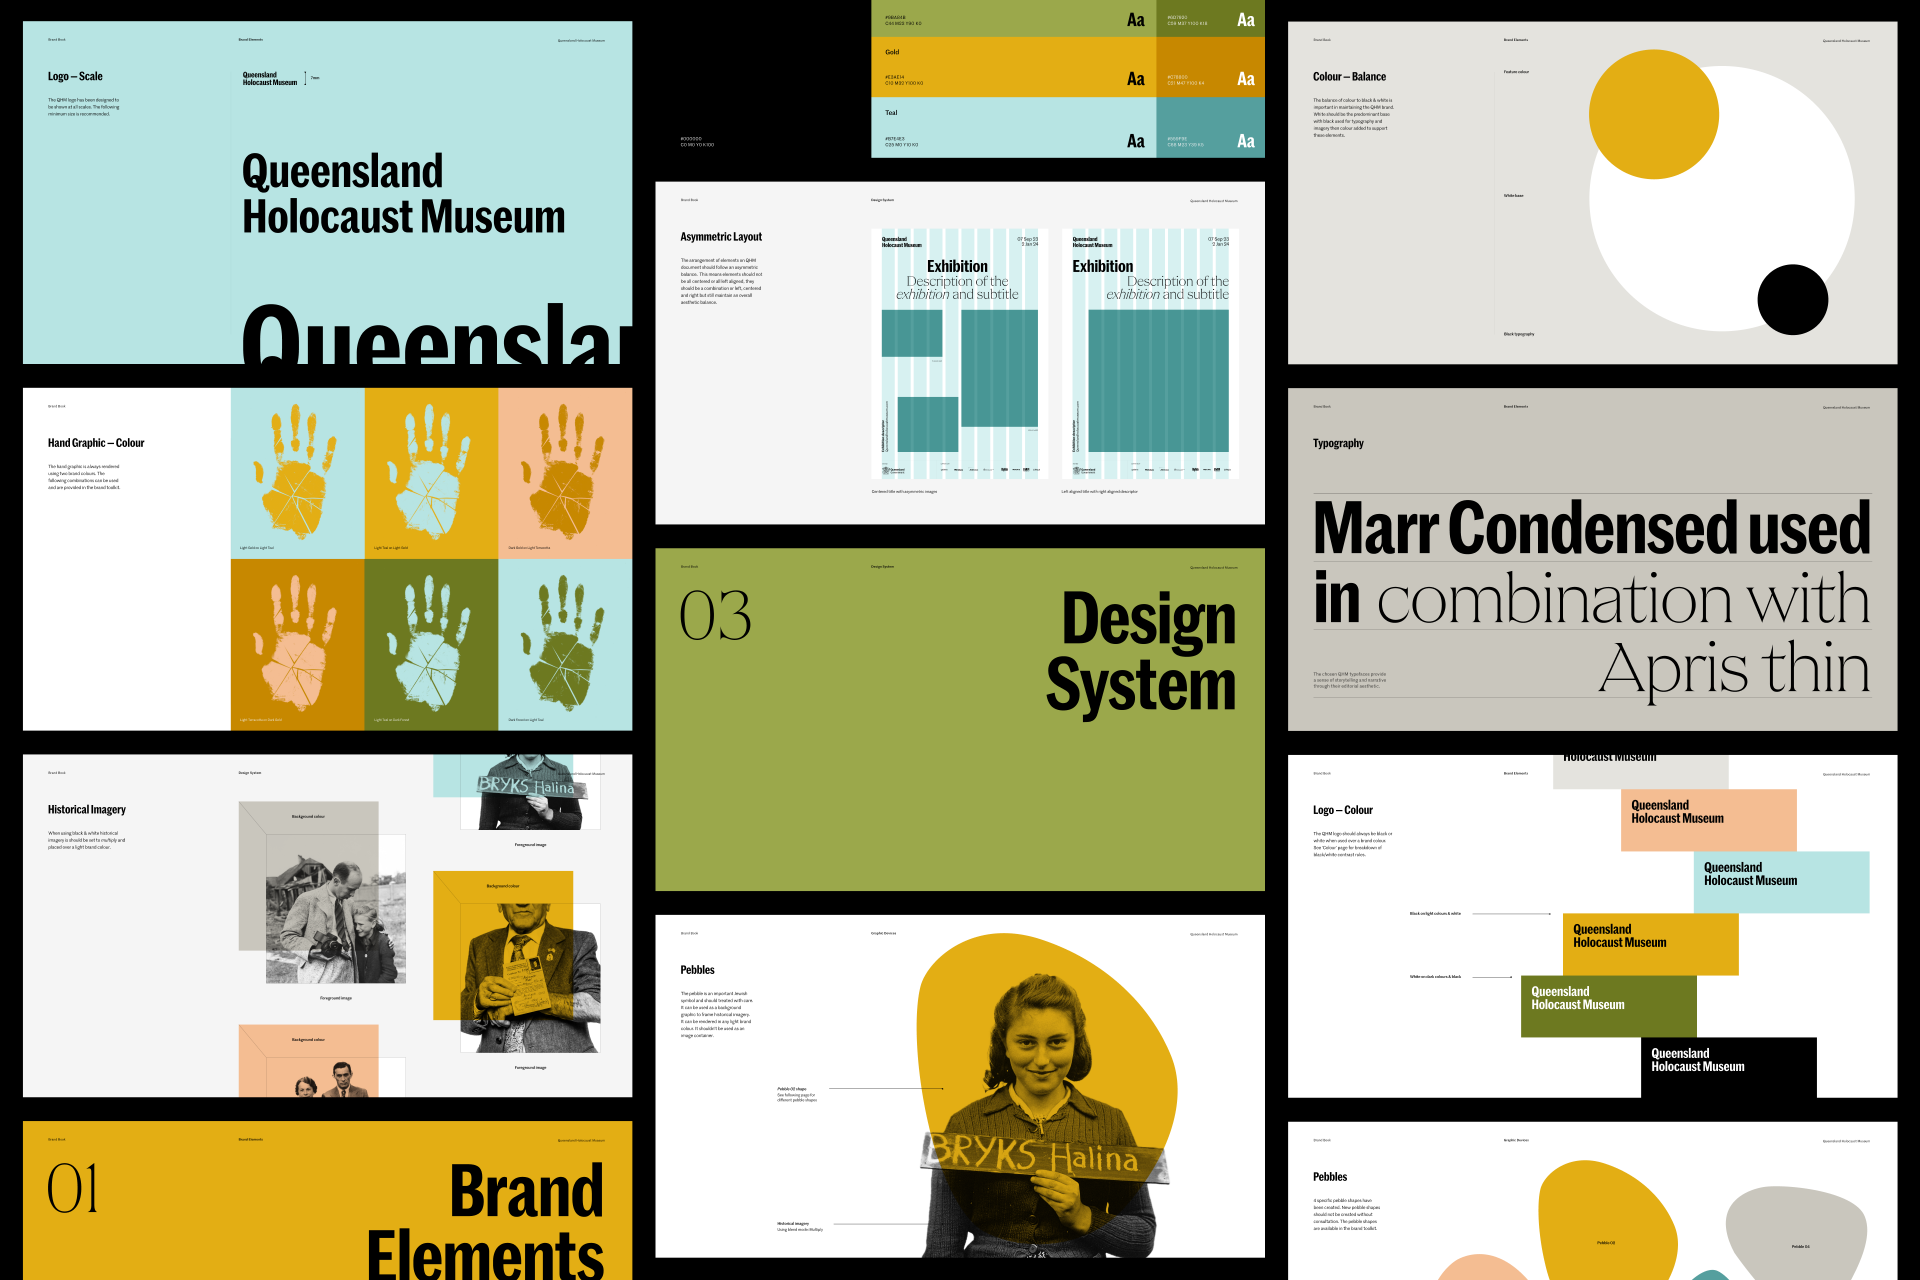 Examples of pages from the brand identity styleguide